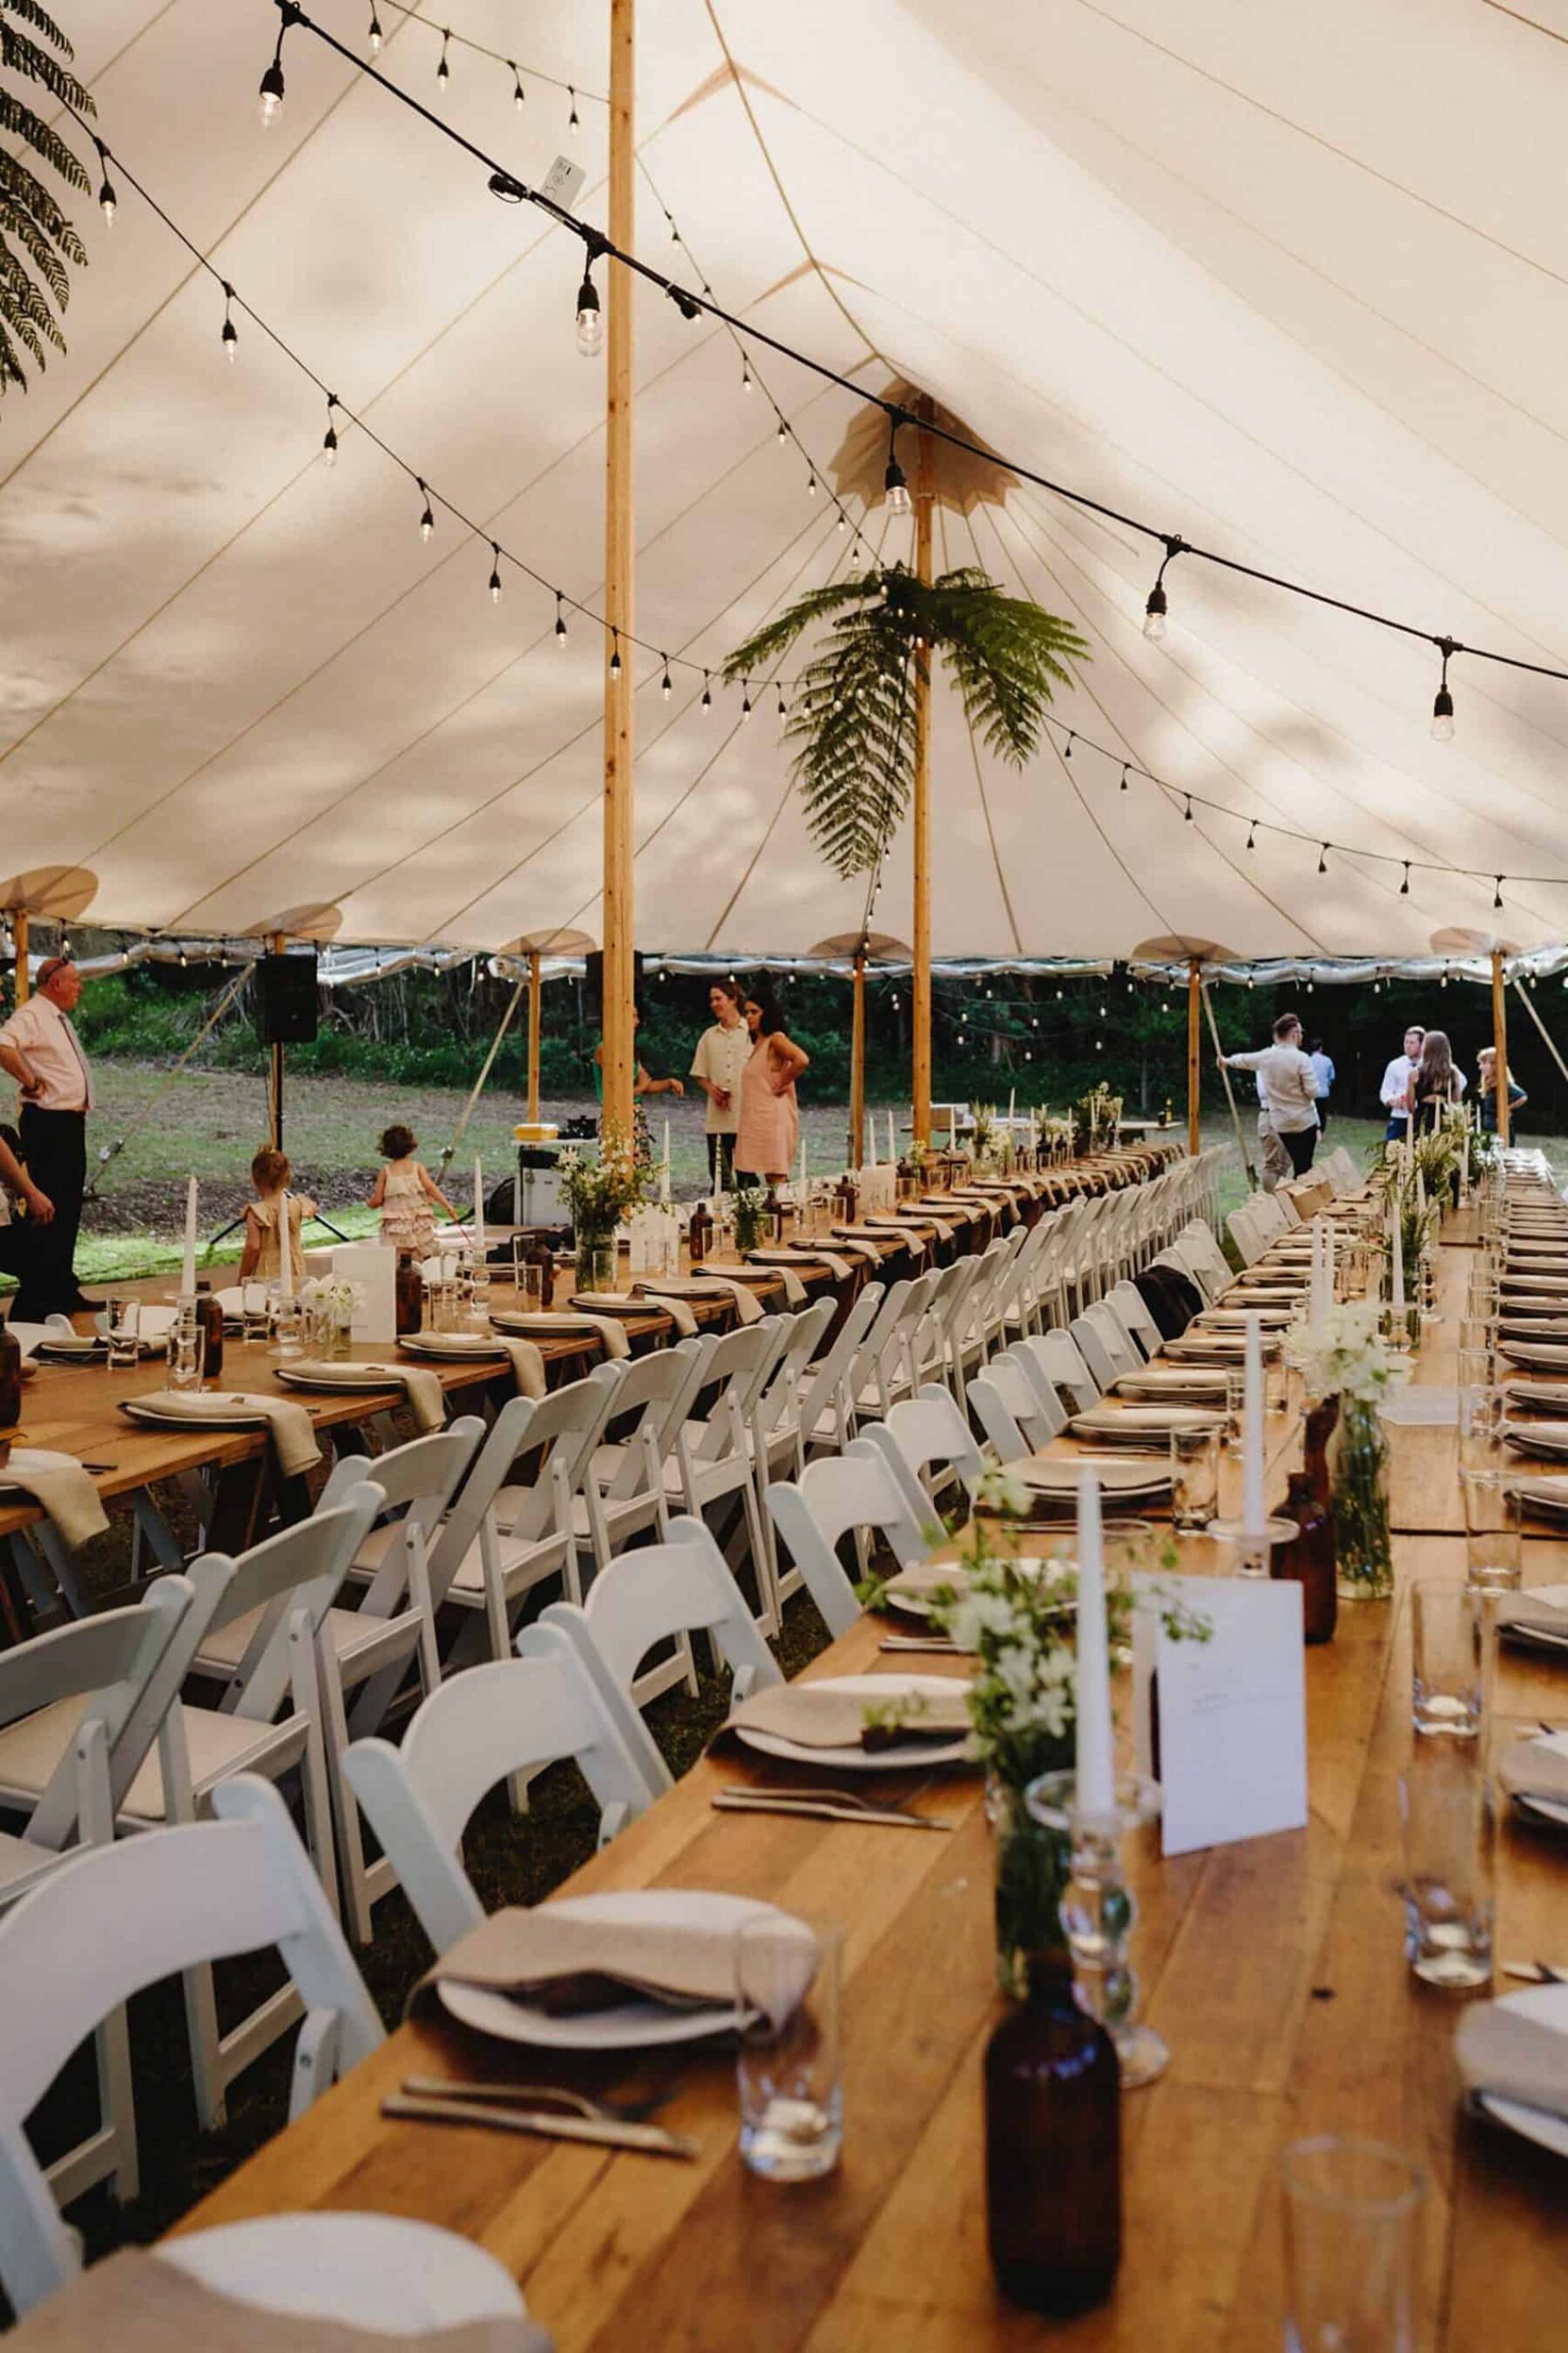 Sperry tent wedding in Gippsland